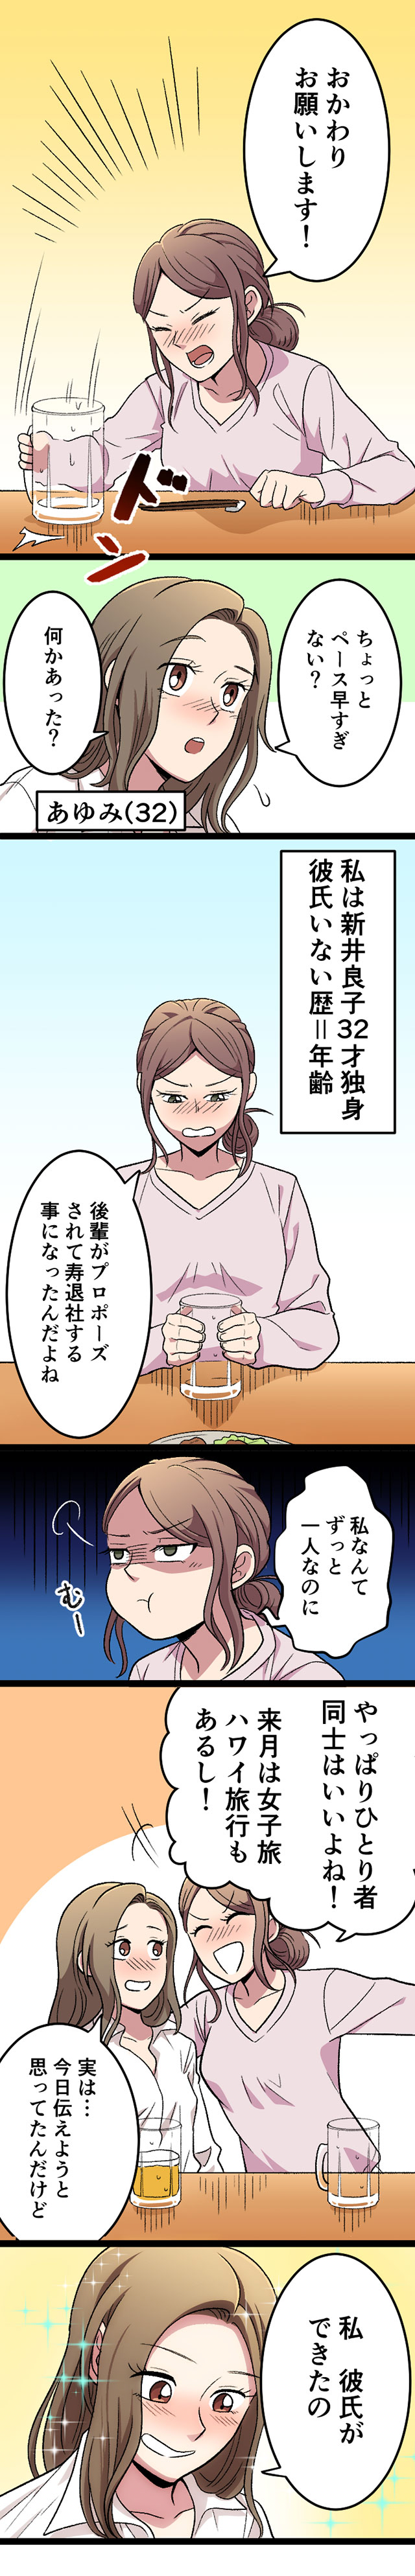 JUNO_占い漫画